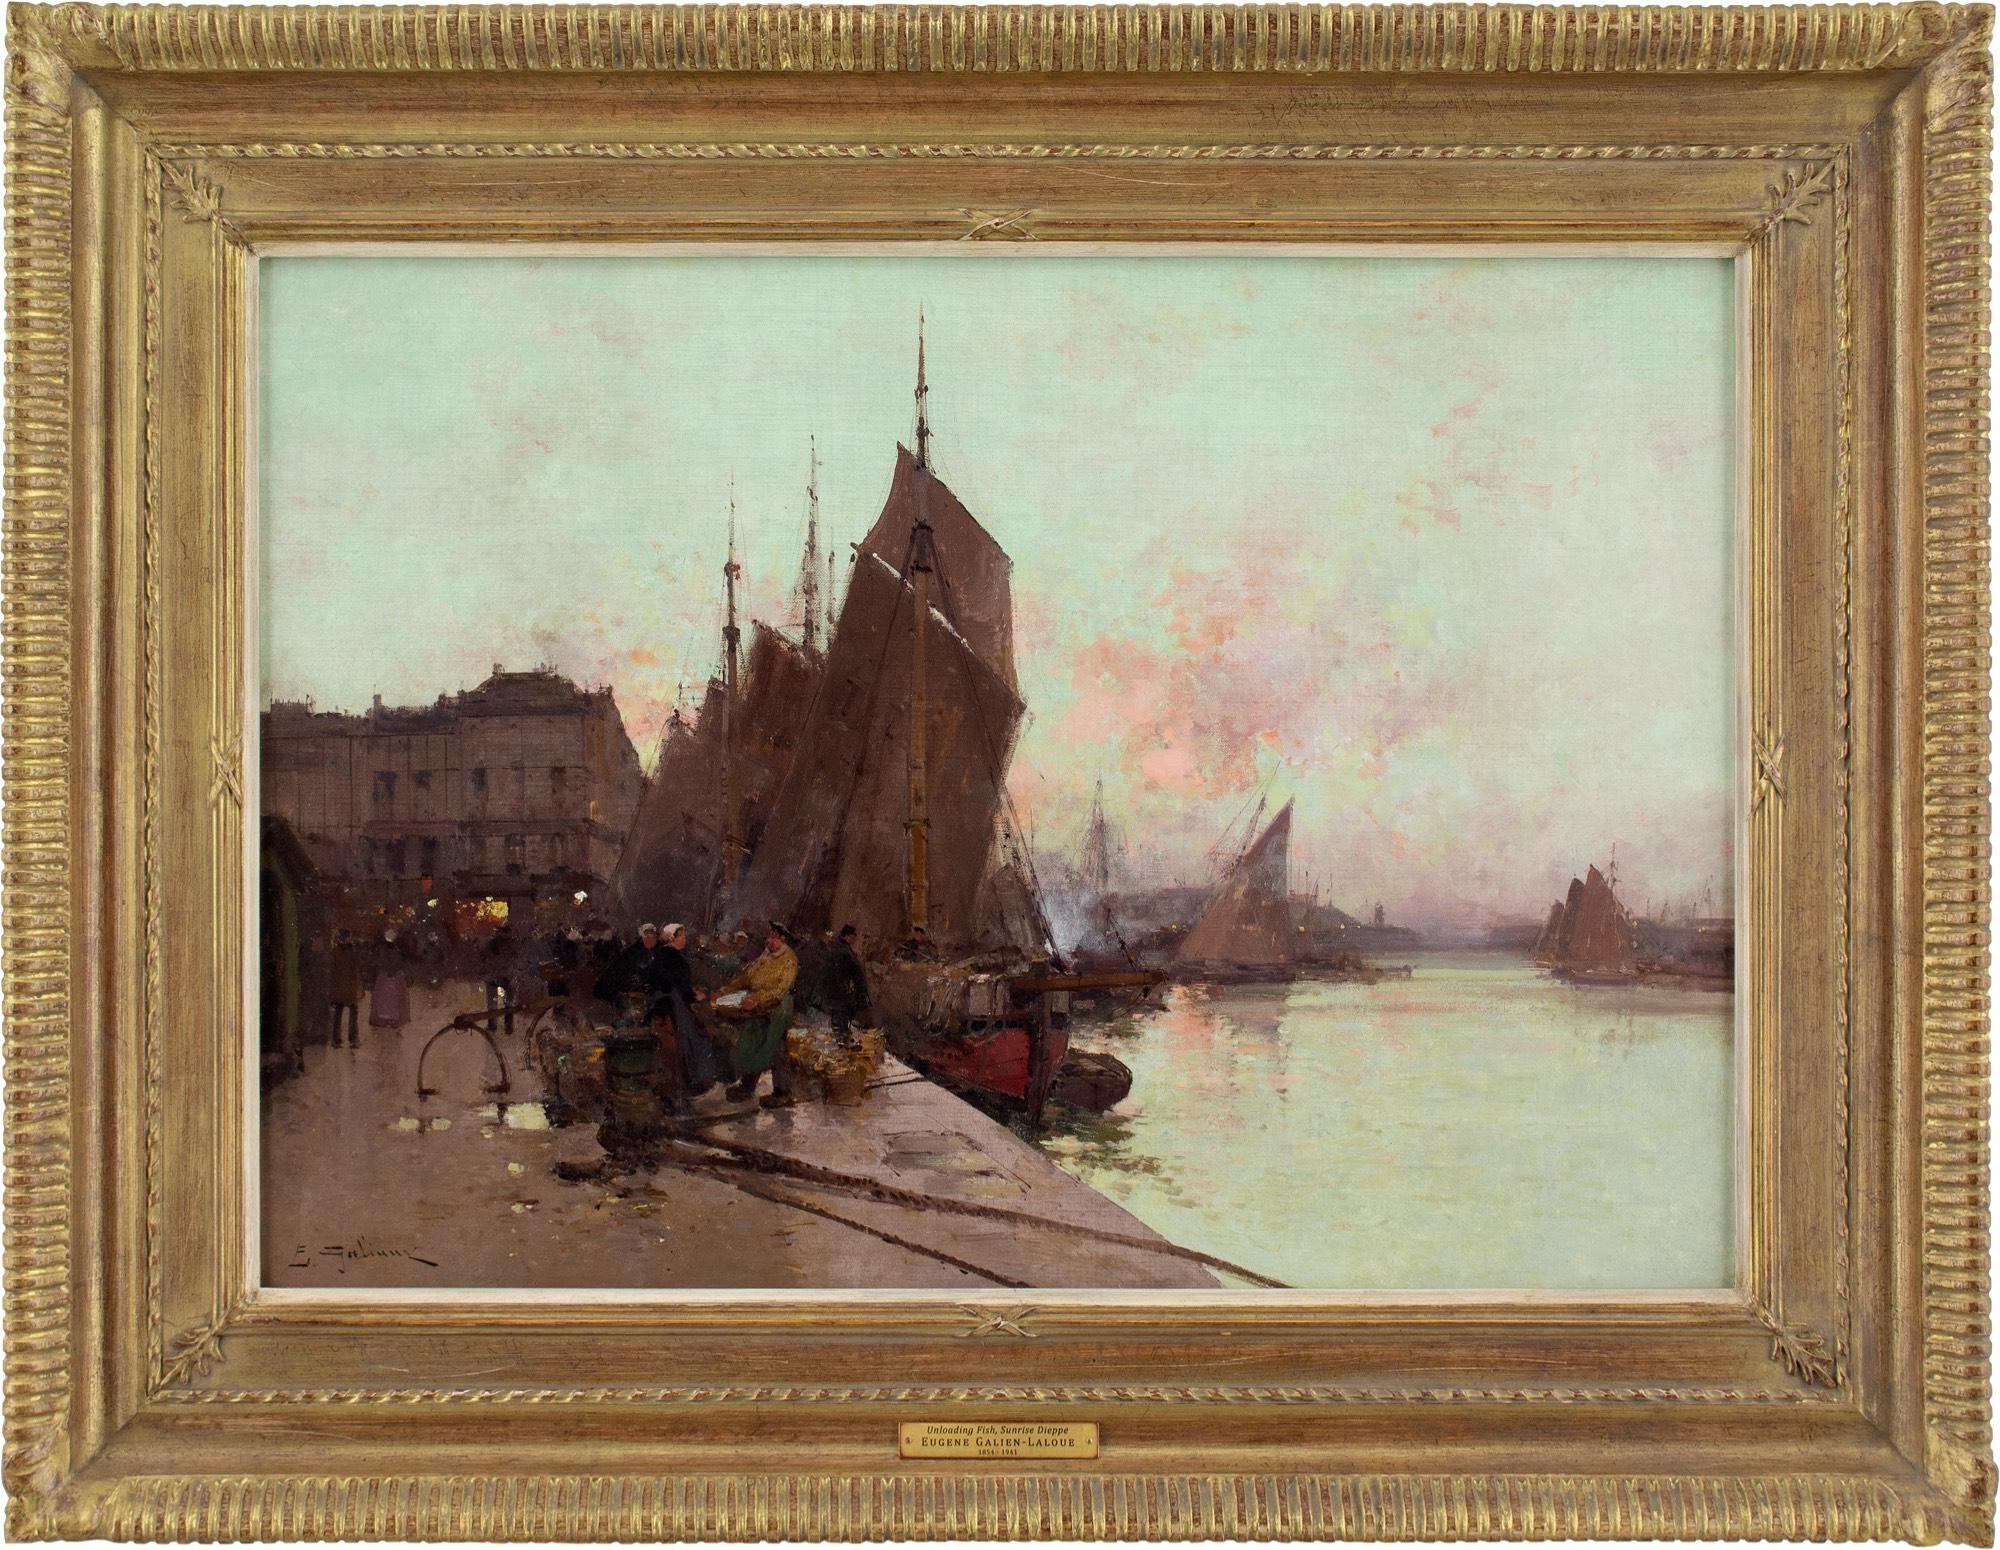 This beautiful early 20th-century oil painting by French artist Eugène Galien-Laloue (1854-1941) depicts several figures unloading fish at the port of Dieppe.

Eugène Galien-Laloue is known for his naturalistic plein-air depictions of Normandy and